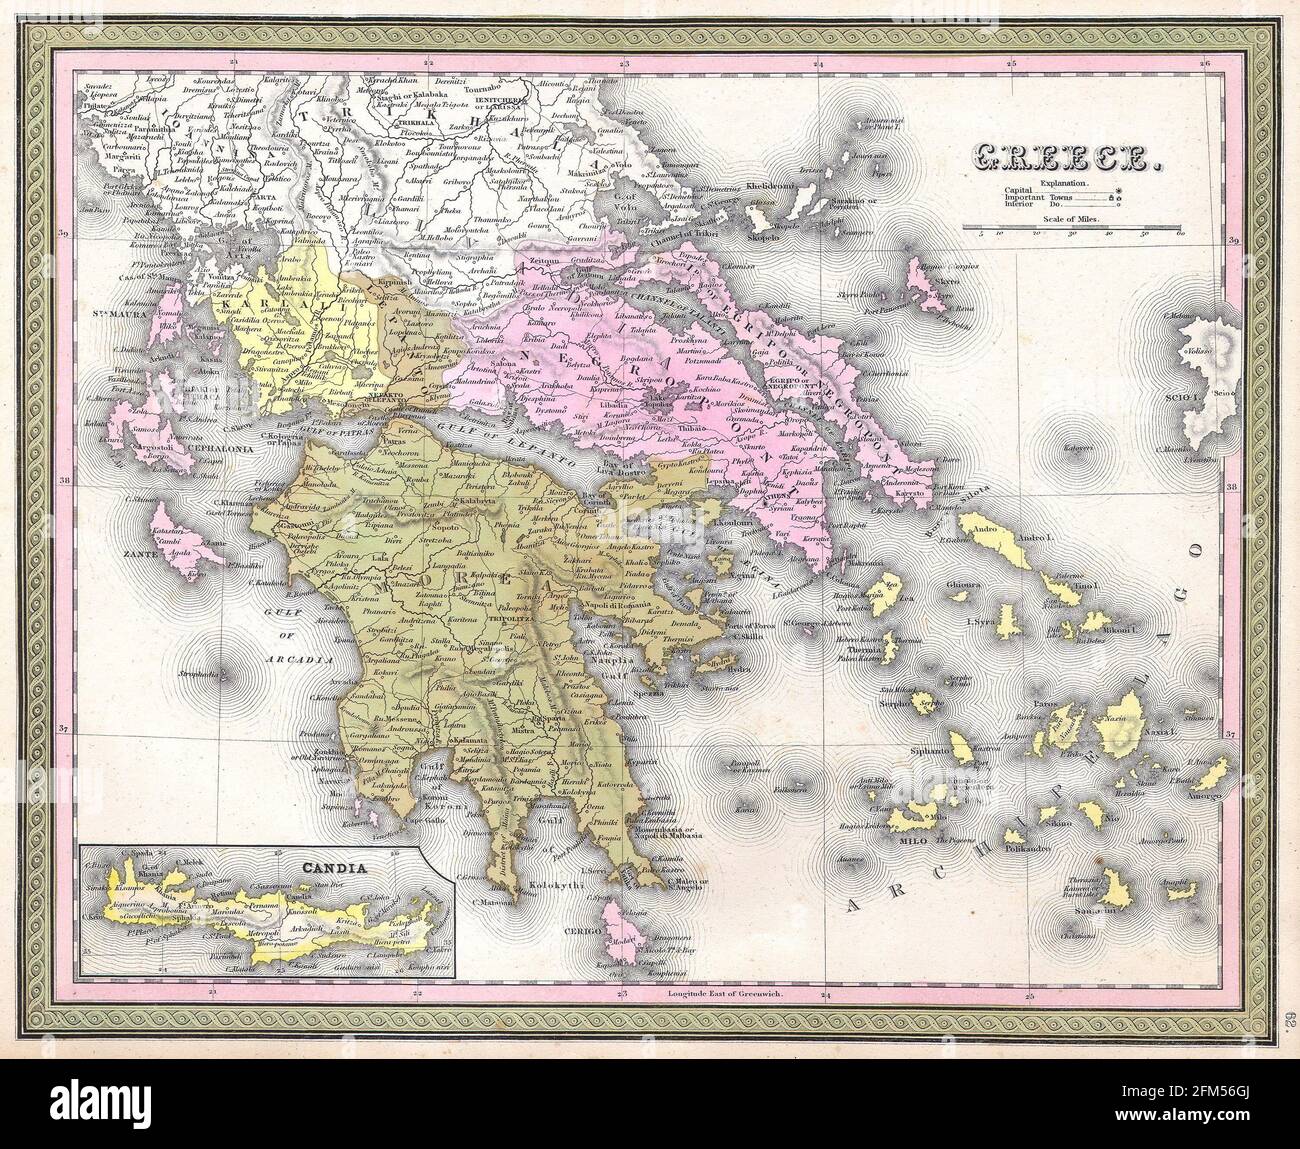 Vintage copper engraved map of Greece from 19th century. All maps are beautifully colored and illustrated showing the world at the time. Stock Photo